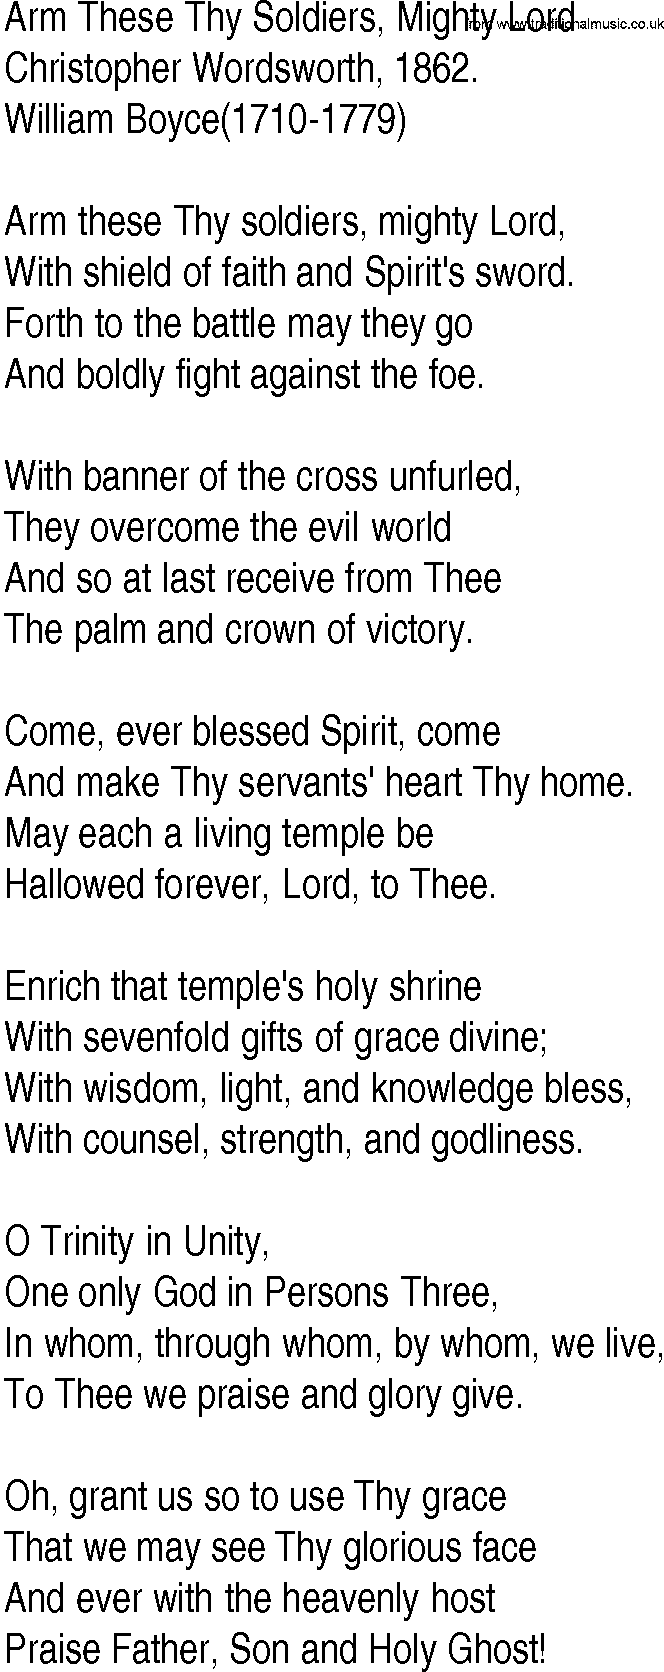 Hymn and Gospel Song: Arm These Thy Soldiers, Mighty Lord by Christopher Wordsworth lyrics